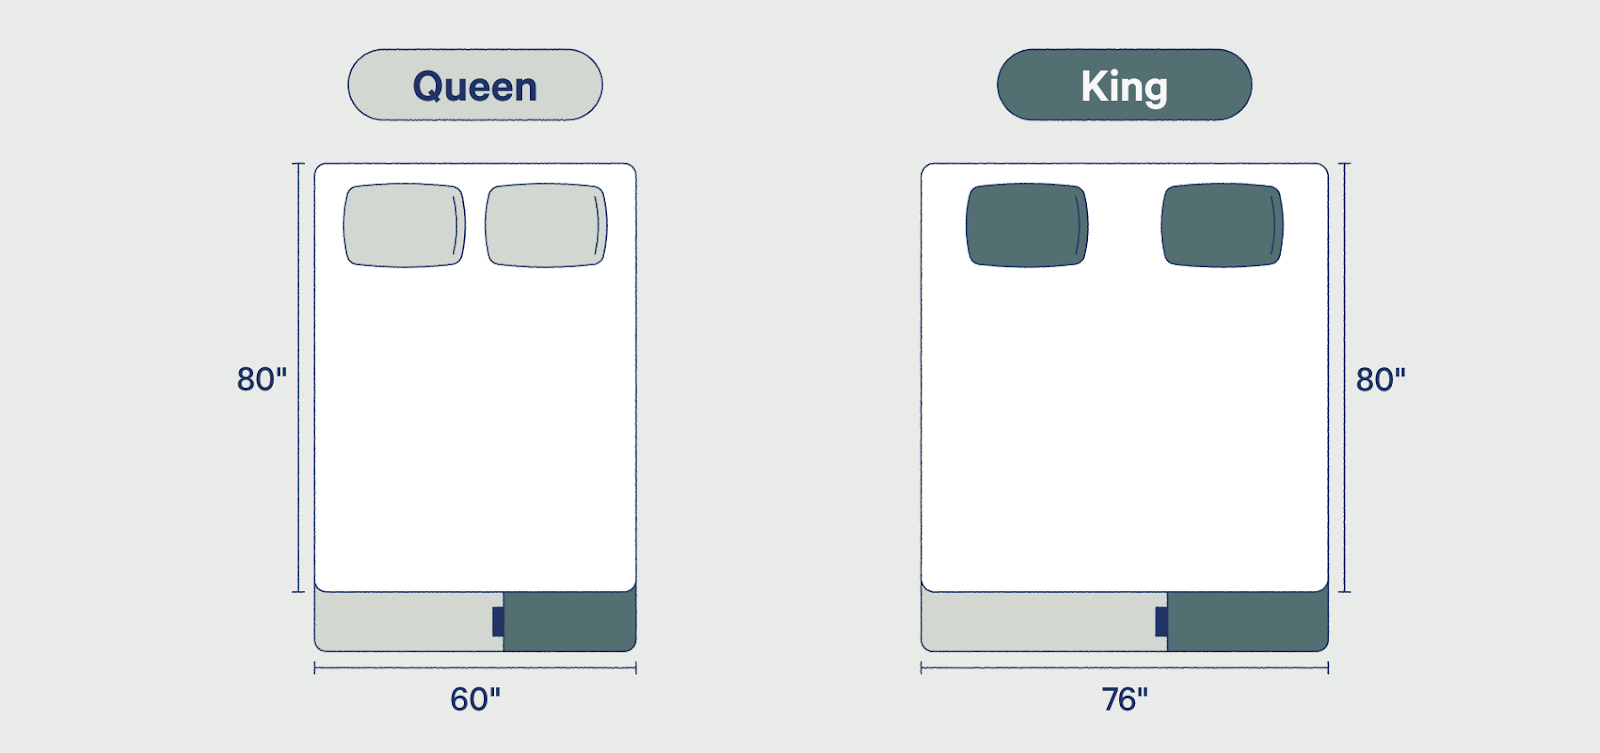 King Vs Queen Bed Size And Comparison, The Dimensions Of A King Size Bed